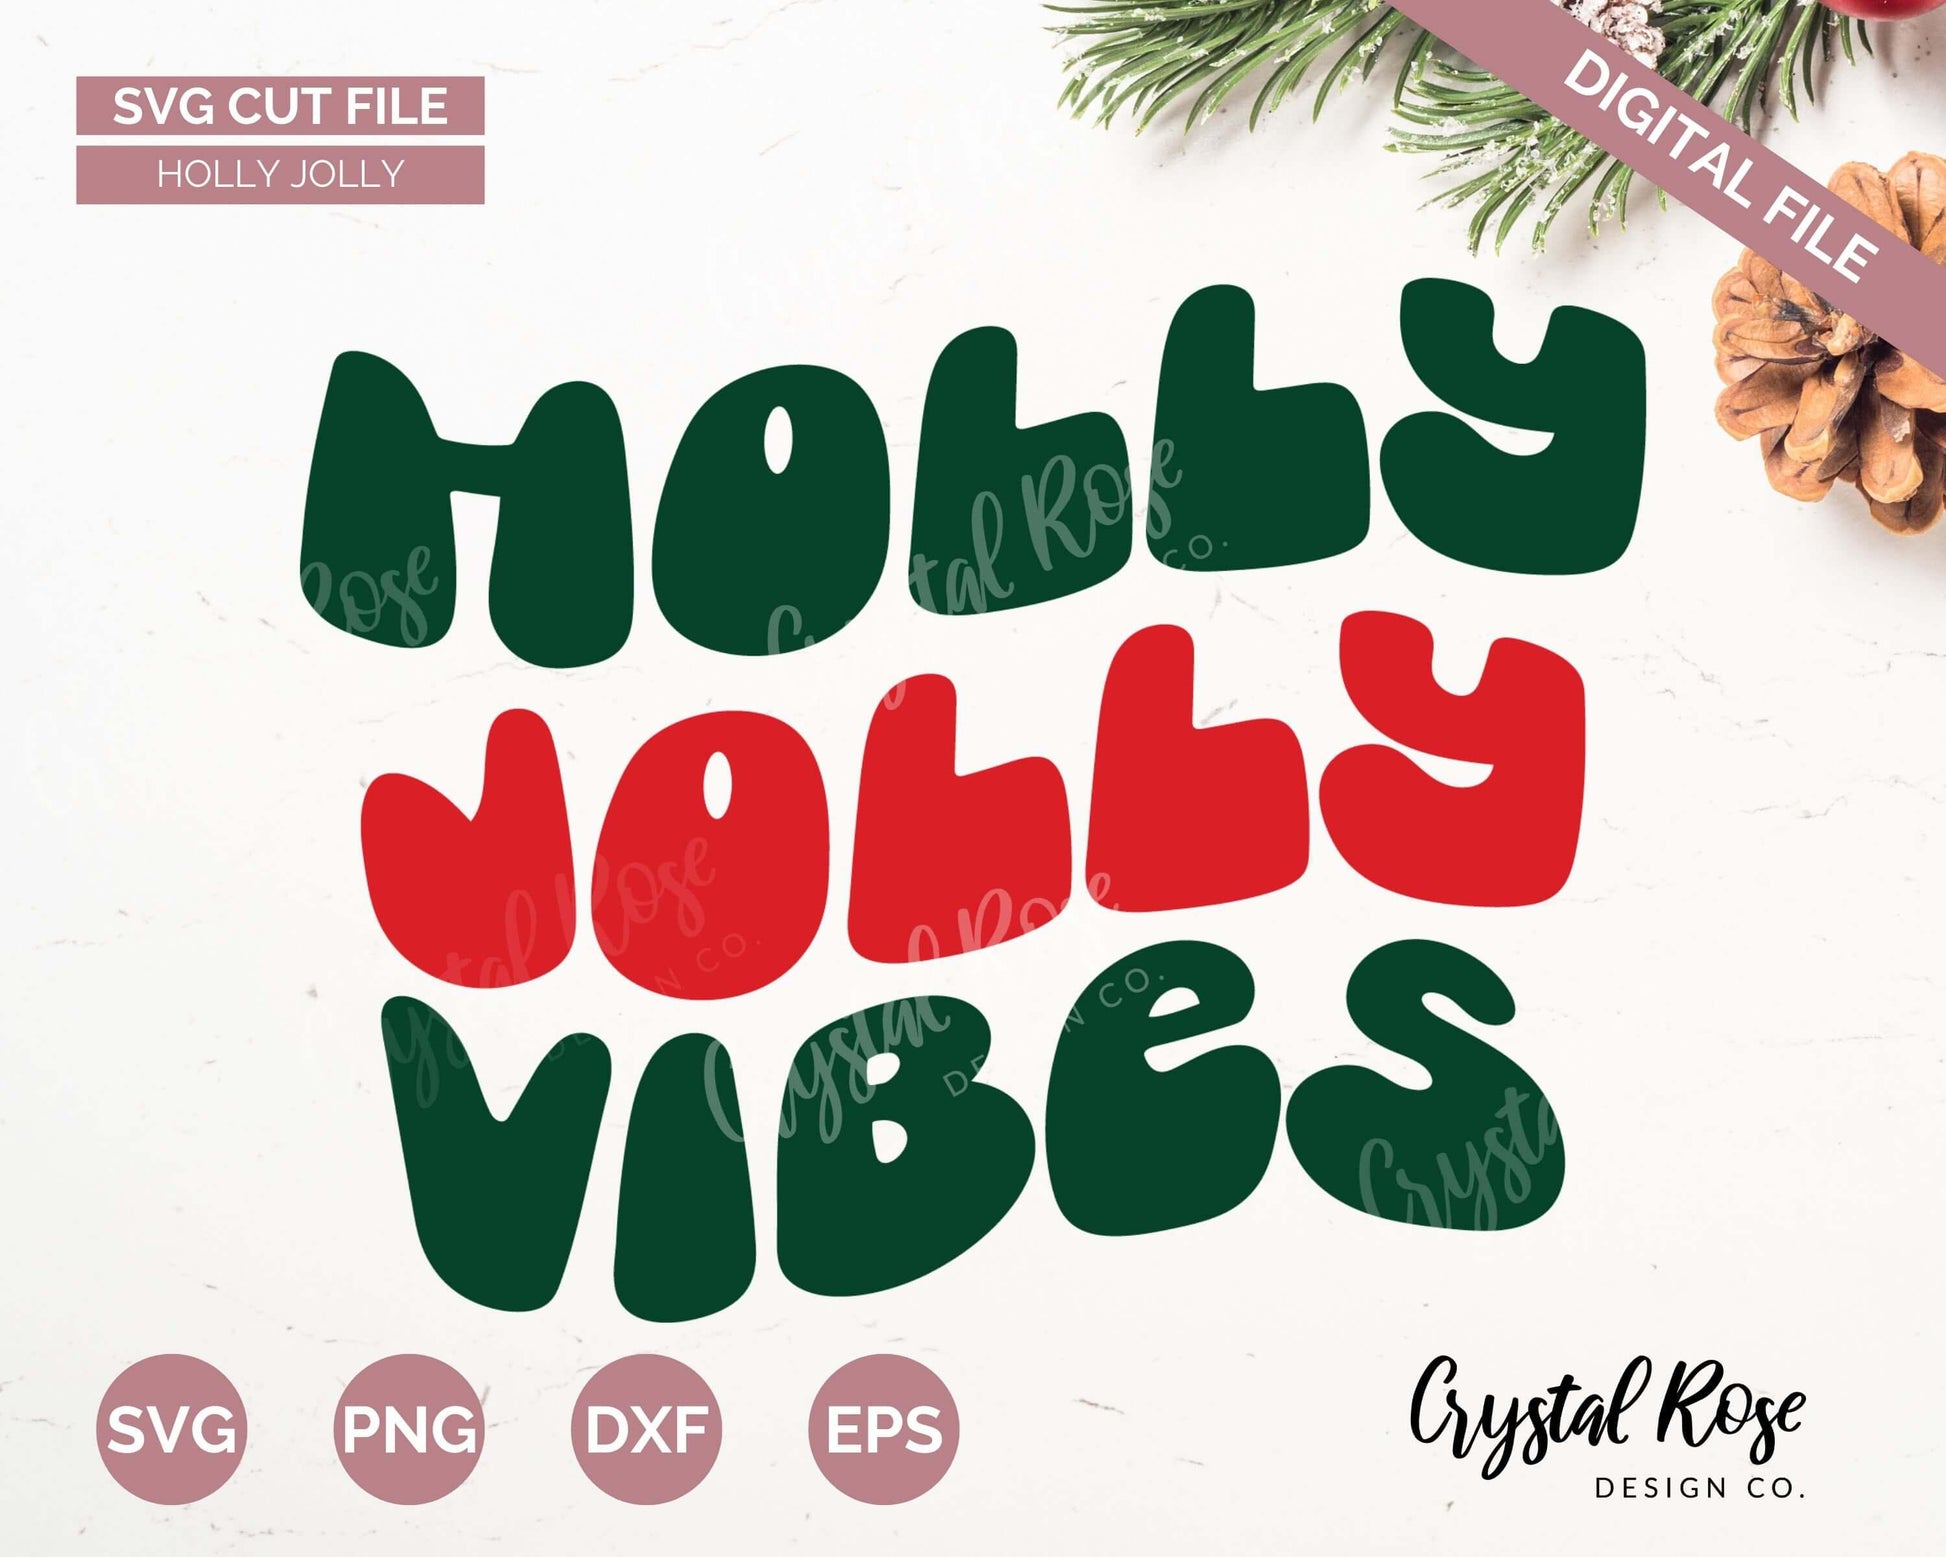 Retro Holly Jolly Vibes SVG, Digital Download, Cricut, Silhouette, Glowforge (includes svg/png/dxf/eps) - Crystal Rose Design Co.